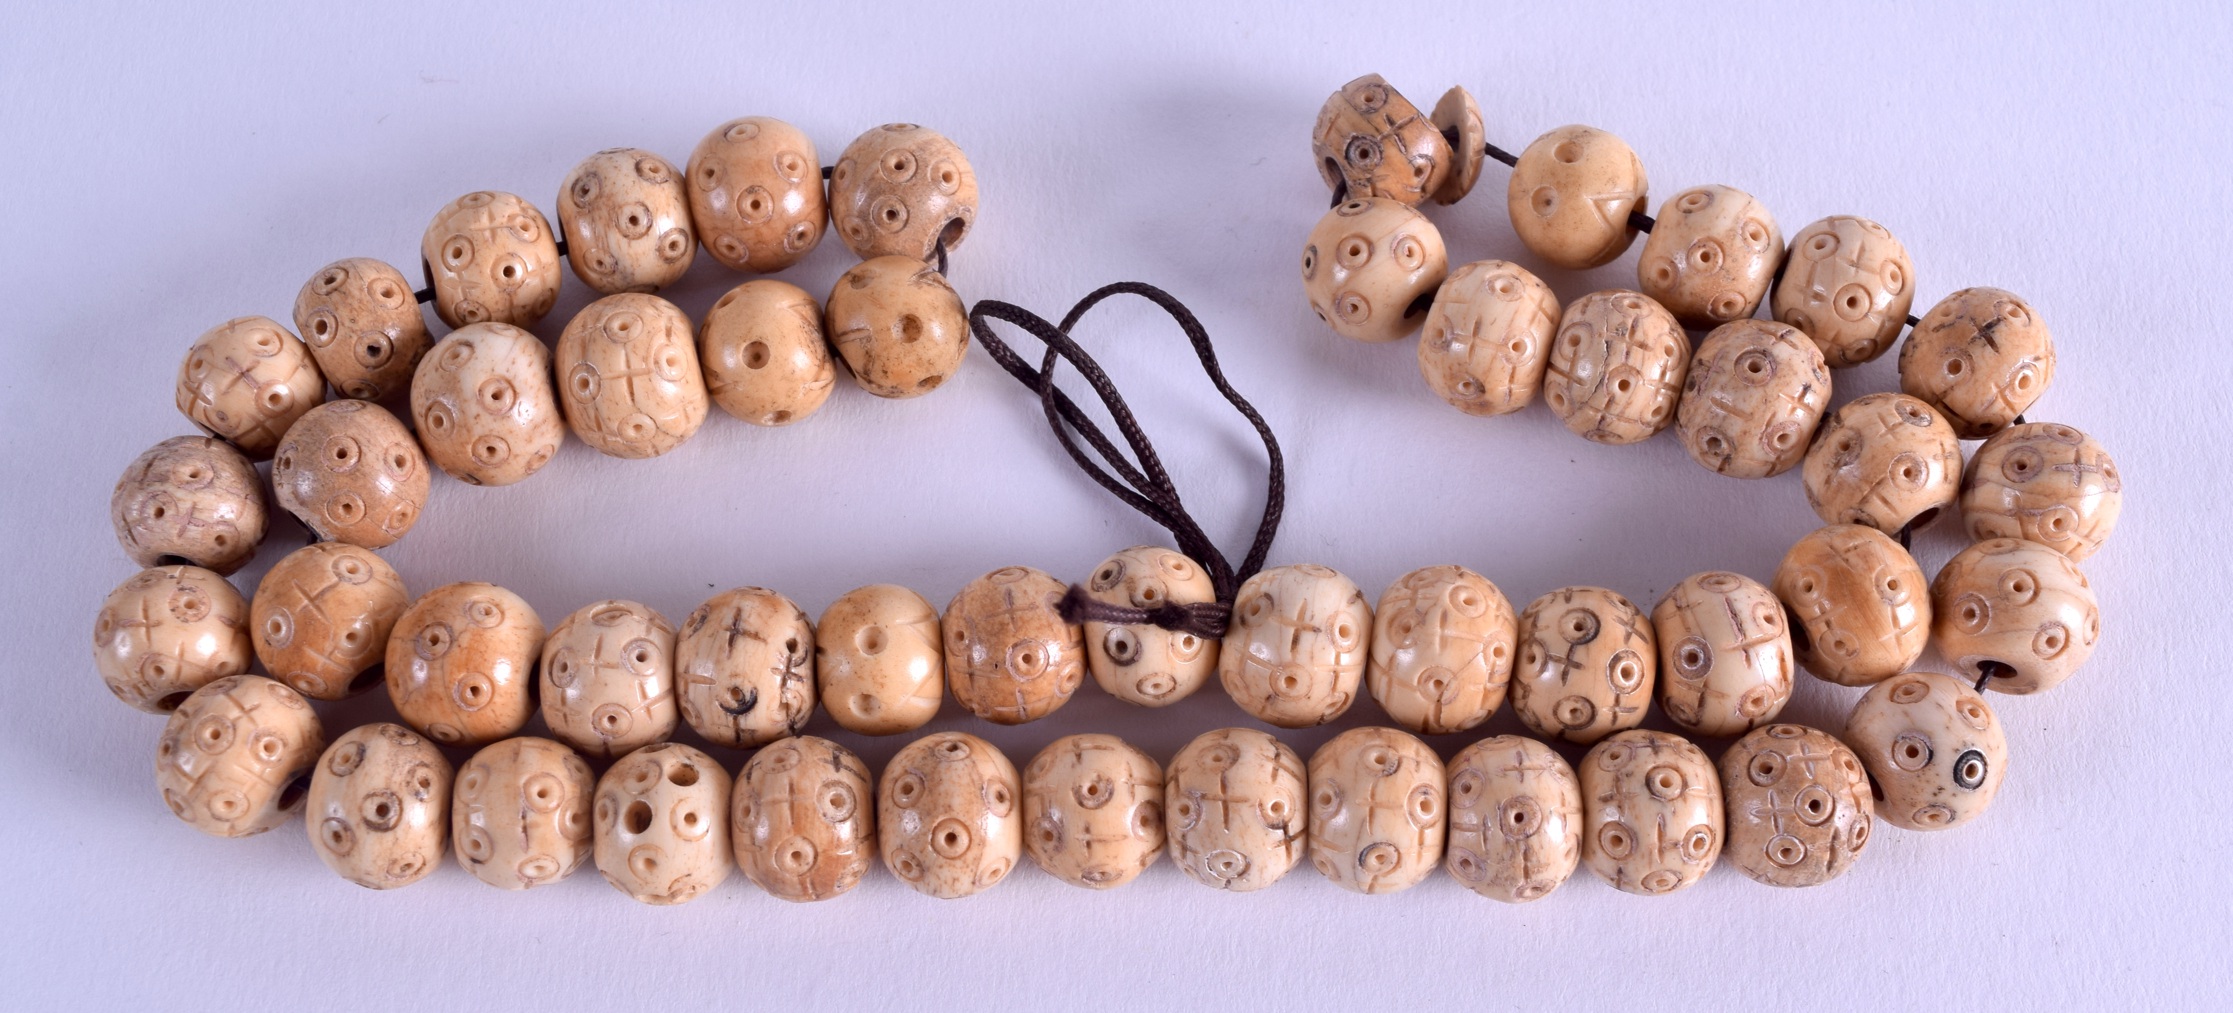 AN UNUSUAL CARVED TRIBAL BONE NECKLACE. 50 cm long.